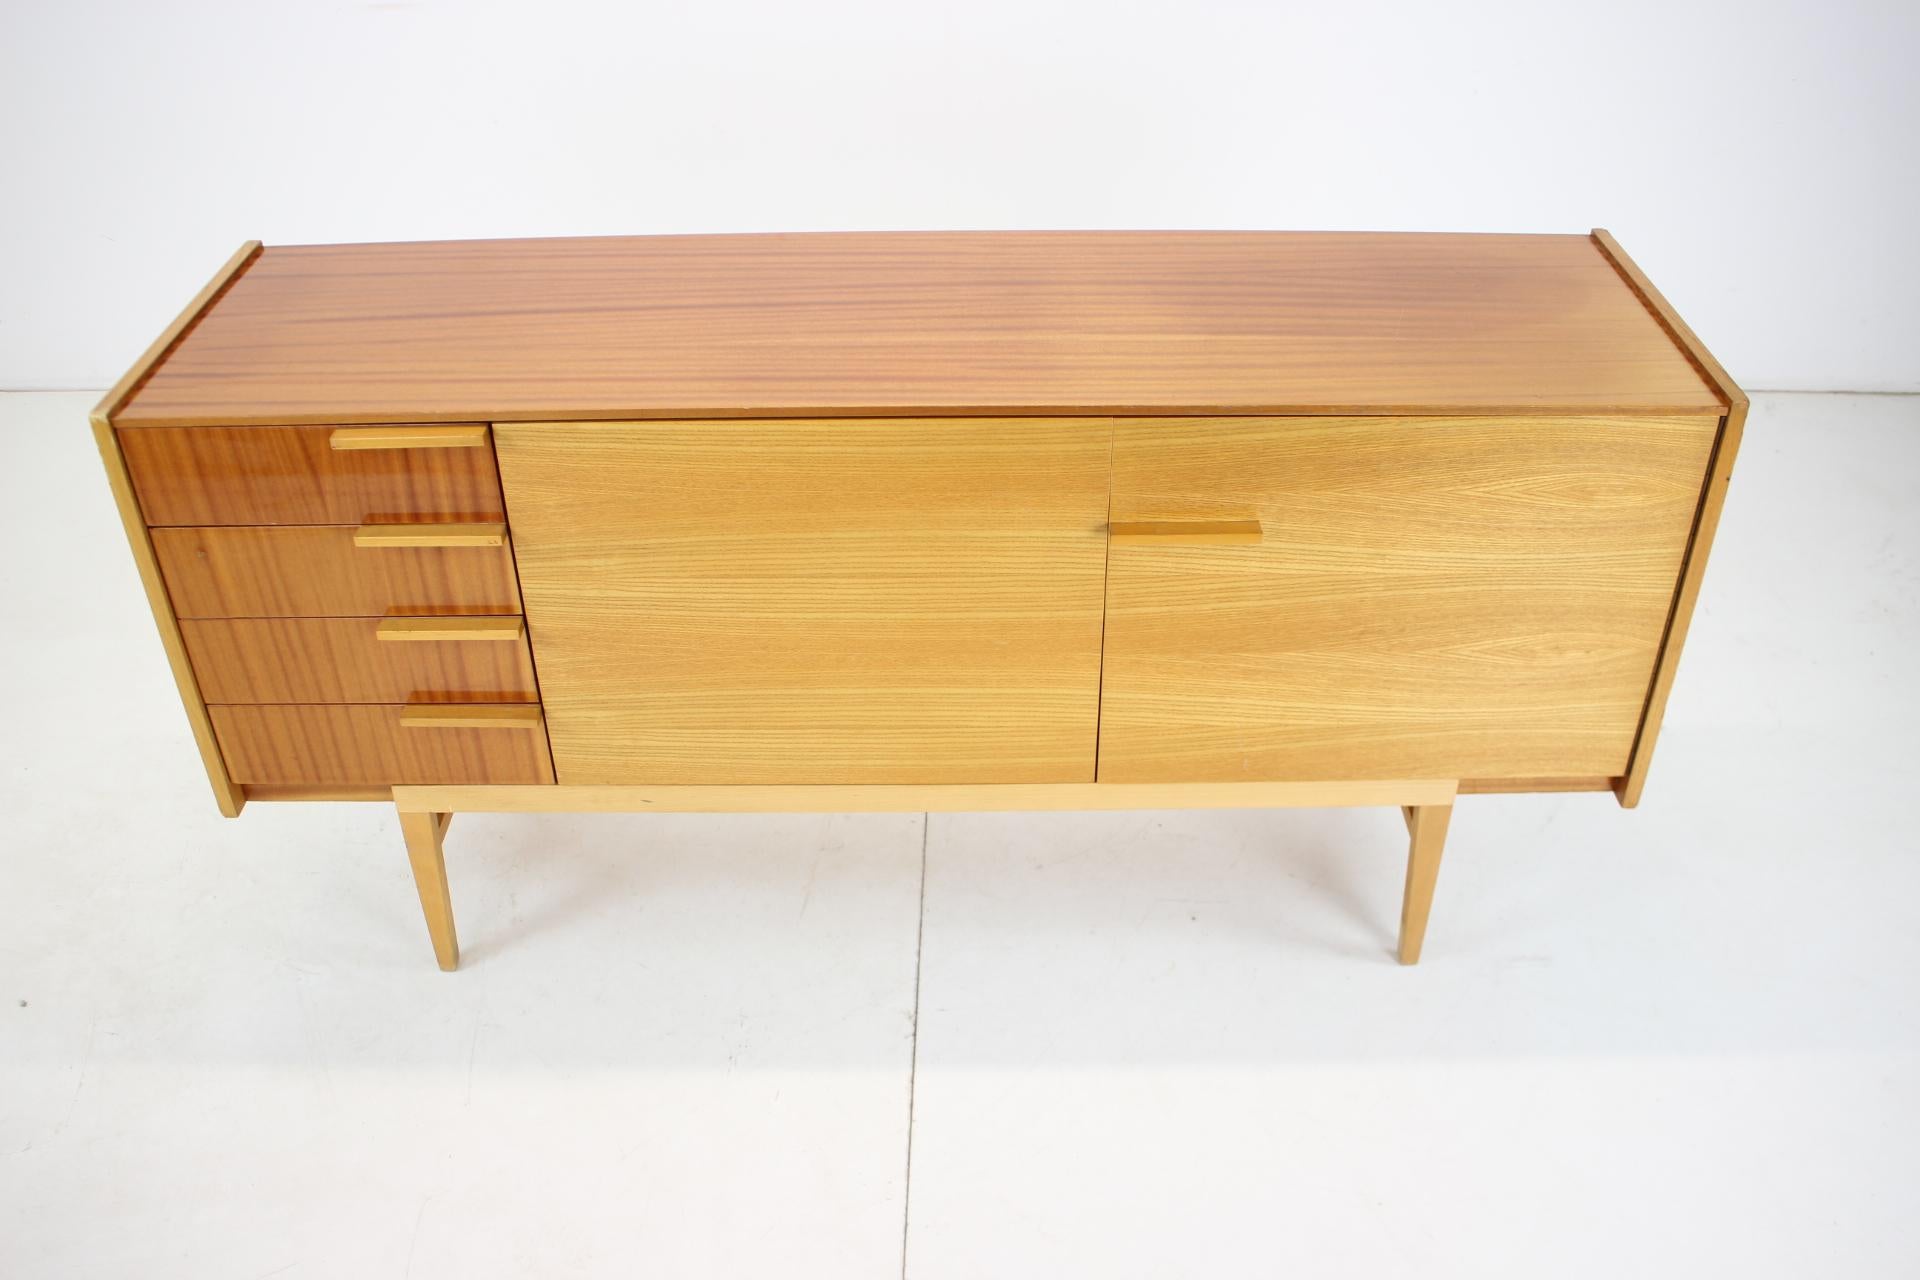 - 1960s
- Designer: František Mezulánik
- Manufacturer: UP Závody
- Good original condition, top plate shows signs of use
- Veneered back, also suitable for the middle of the room.